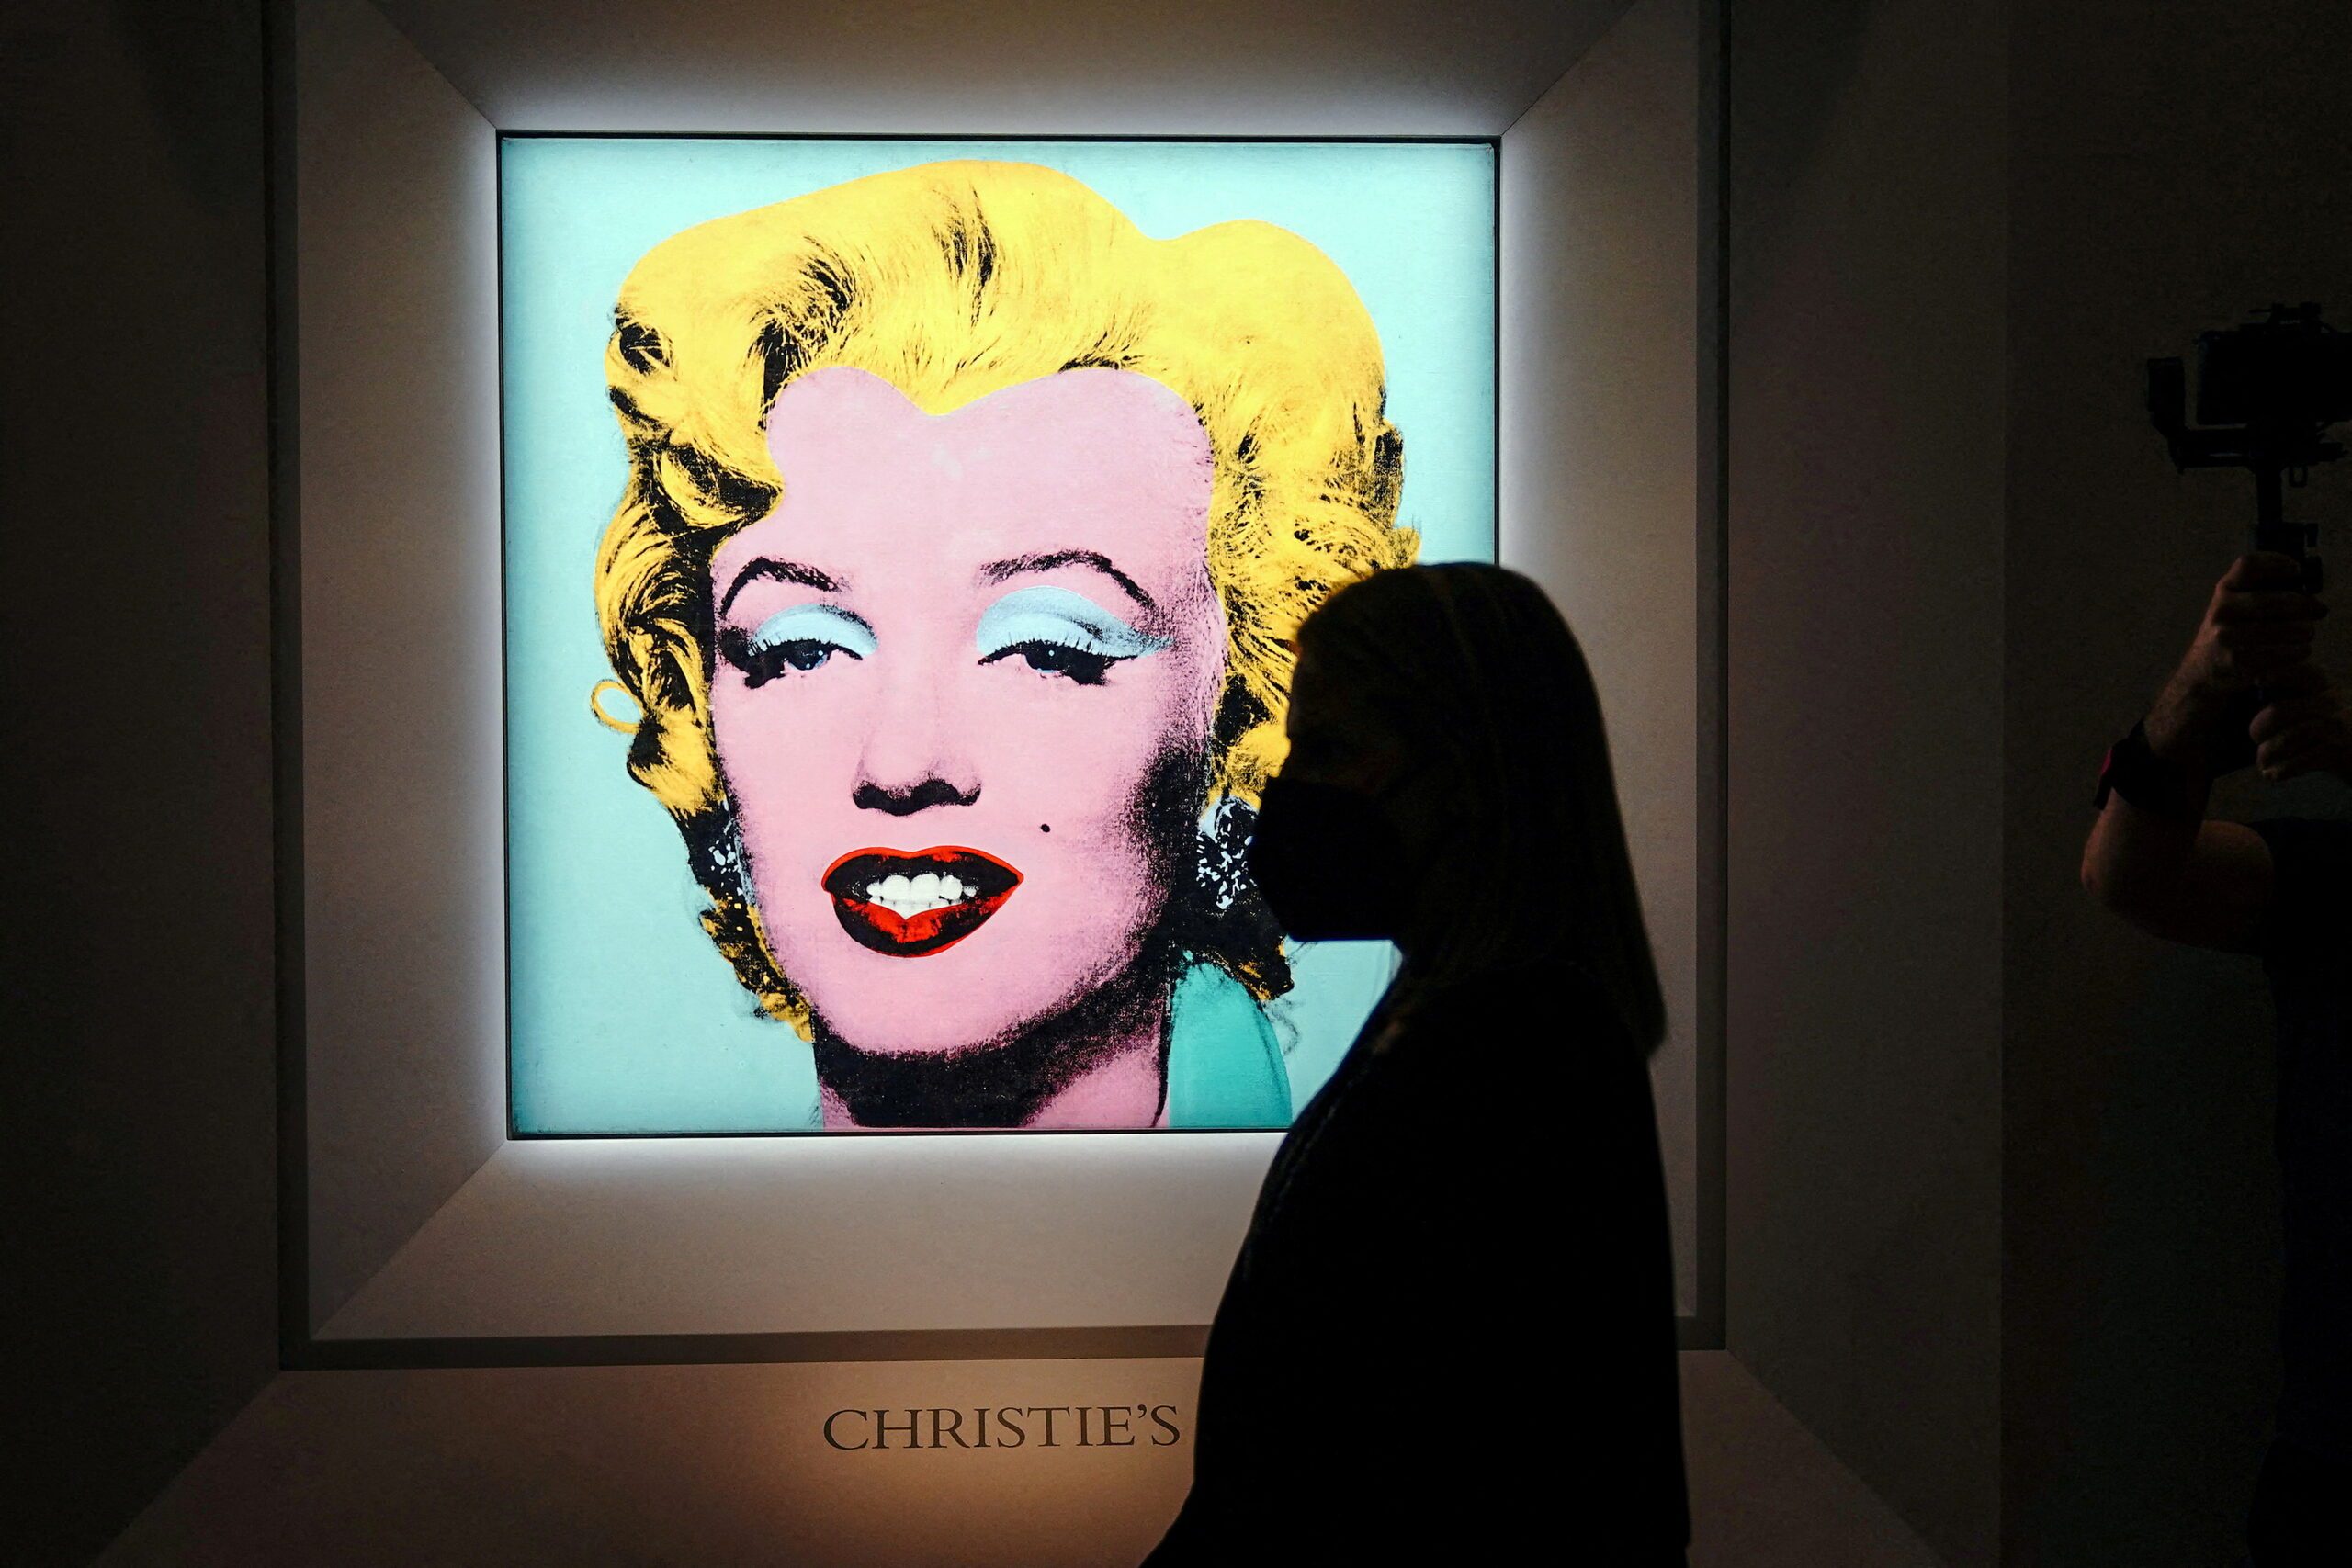 Andy Warhol’s famed ‘Marilyn’ sells for record $195 million at auction